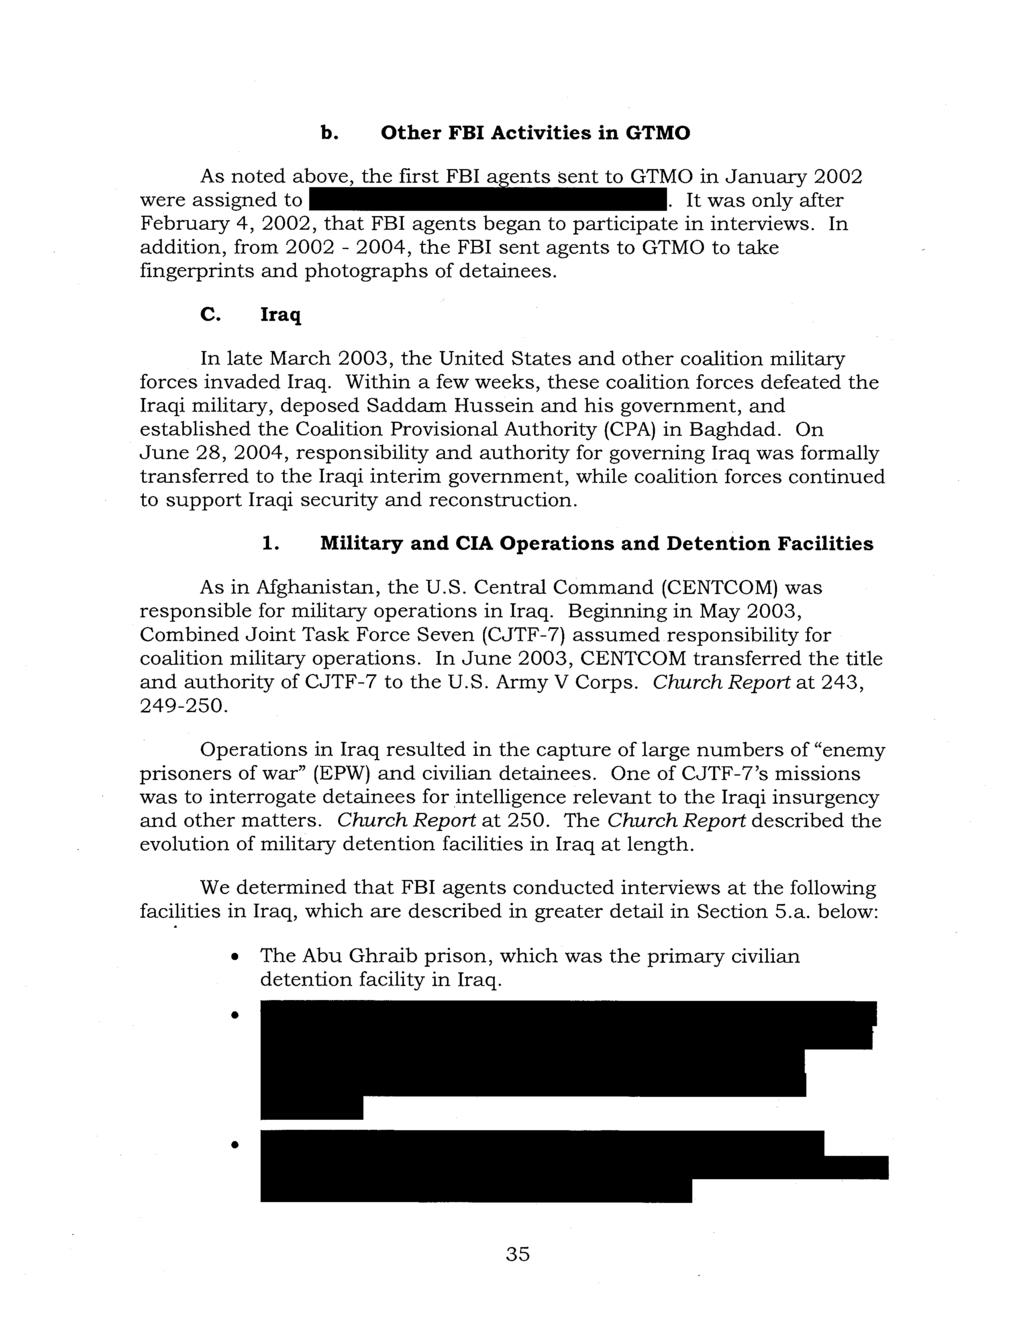 b. Other FBI Activities in GTMO As noted above, the first FBI a ents Sent to GTMO in January 2002 were assigned to.